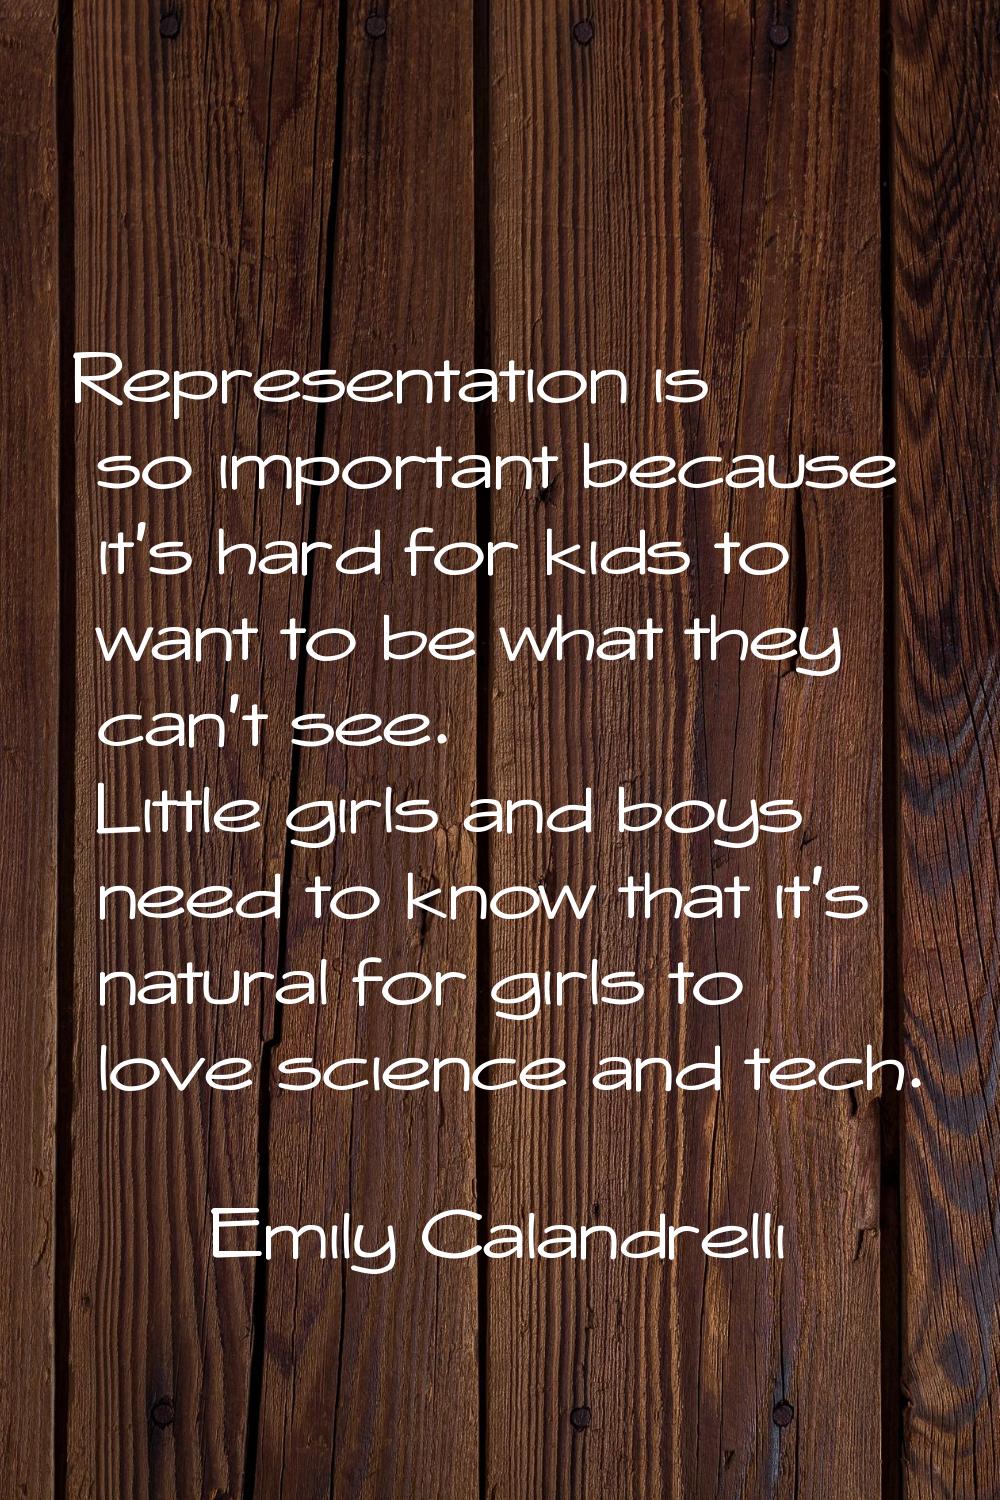 Representation is so important because it's hard for kids to want to be what they can't see. Little